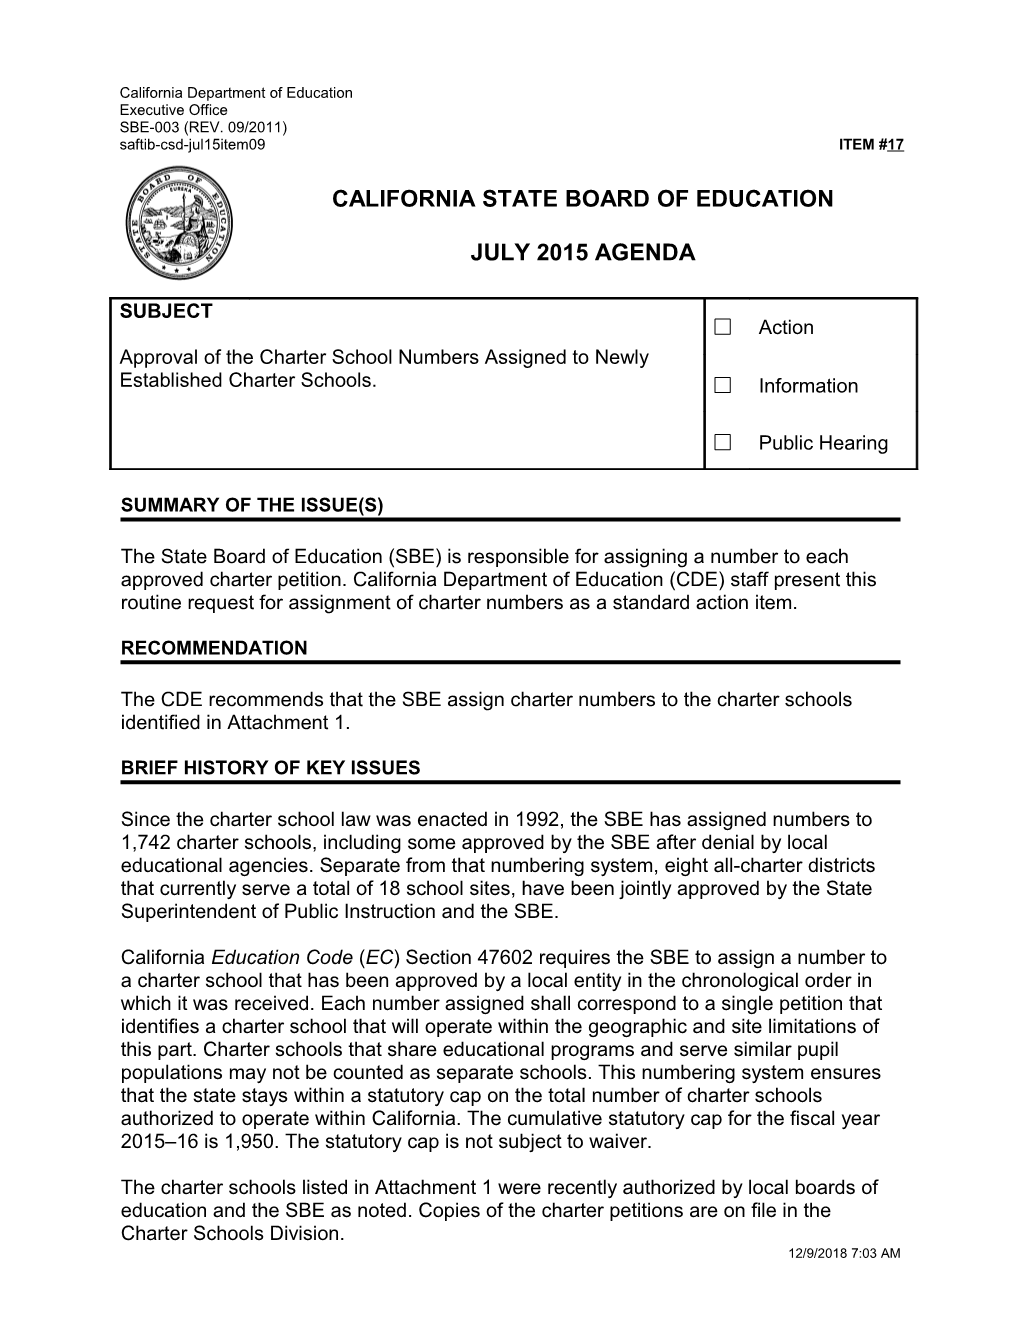 July 2015 Agenda Item 17 Revised - Meeting Agendas (CA State Board of Education)